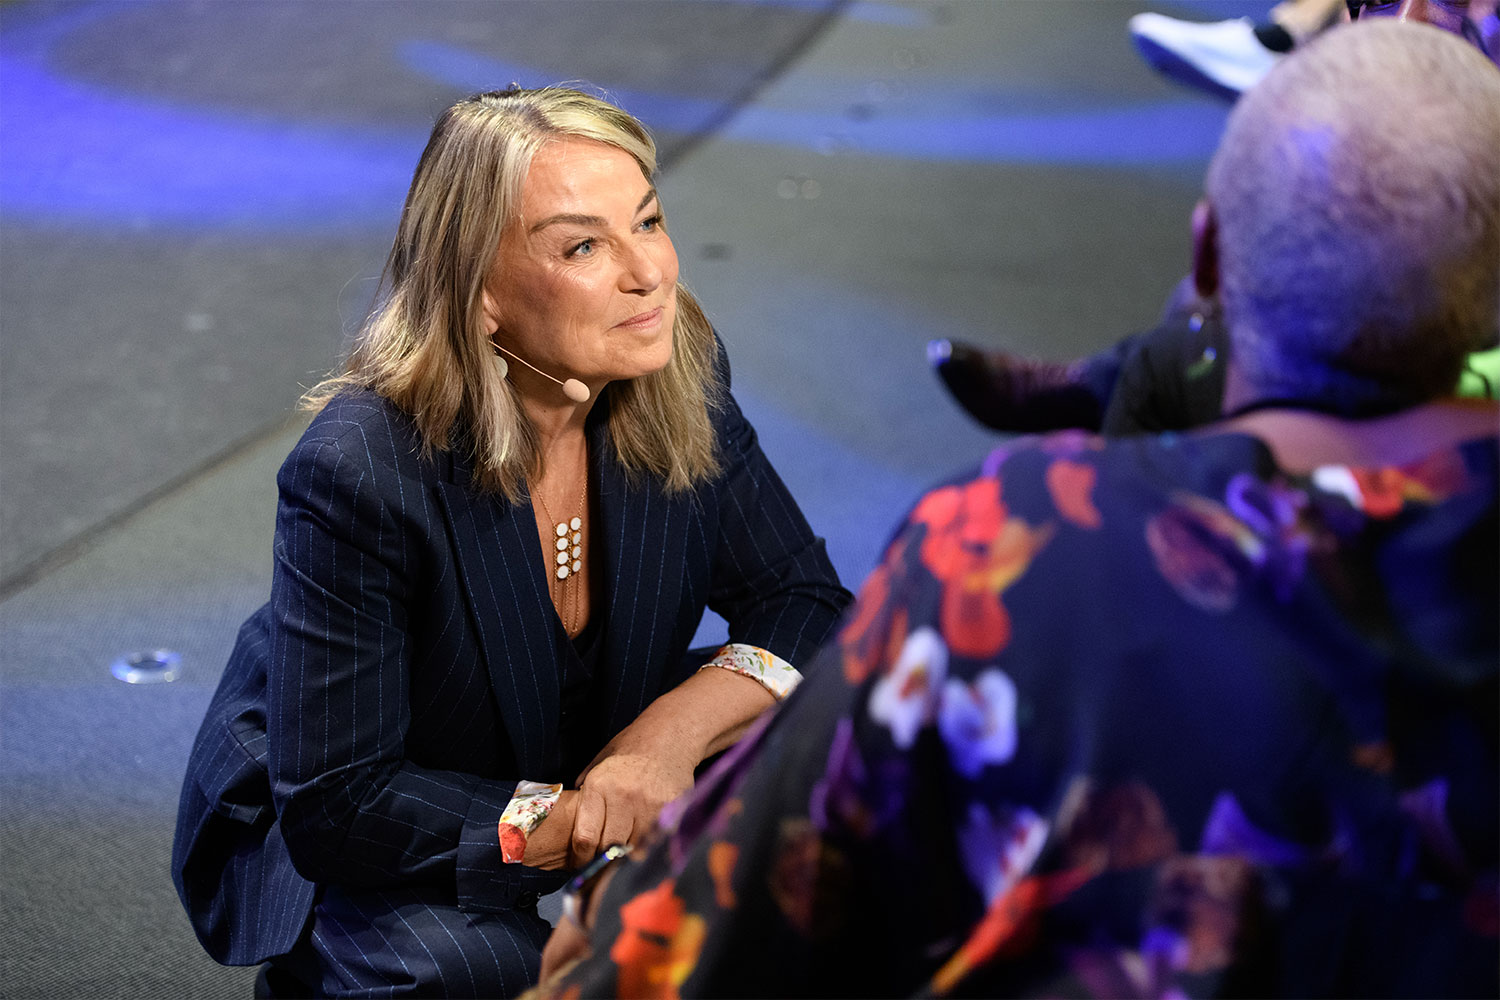 Esther Perel stand kneels down to speak to front row audience